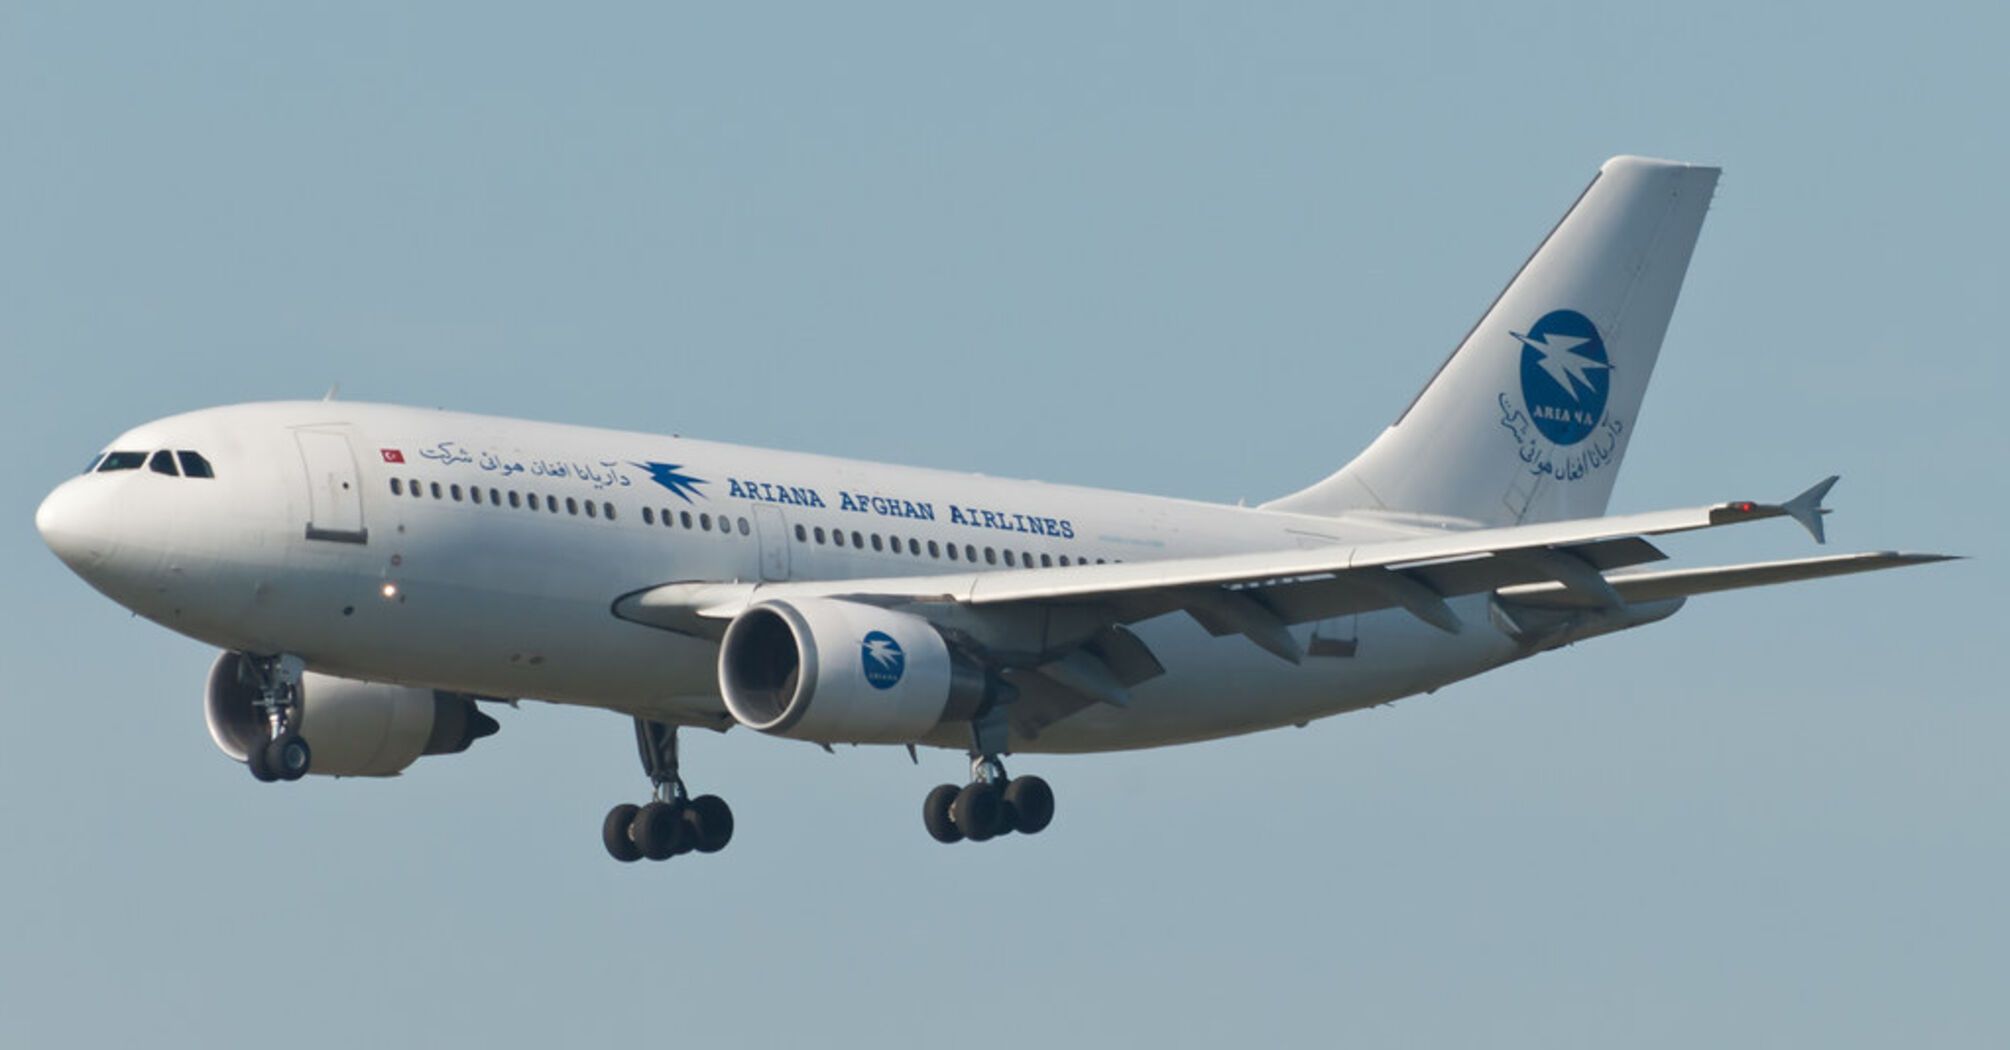 Ariana Afghan Airlines Compensation for Delayed or Cancelled Flights